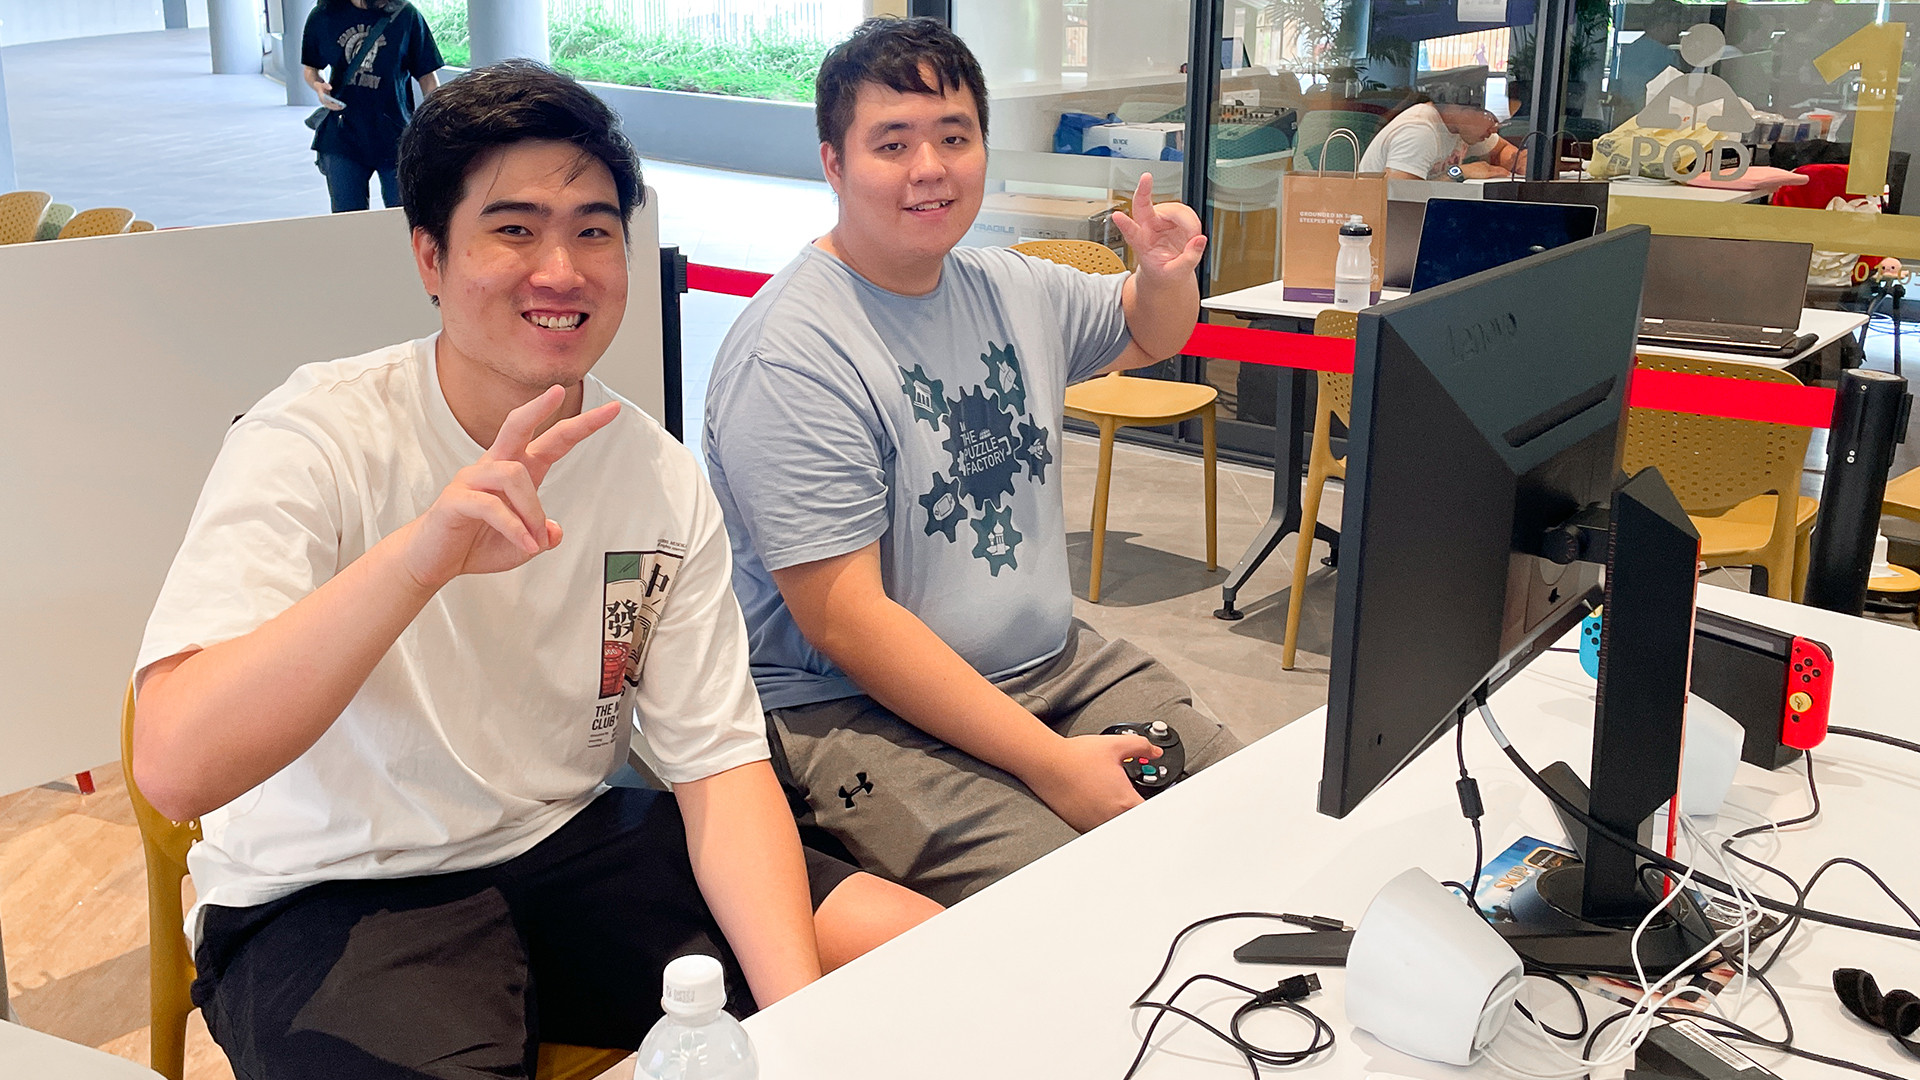 NUS students Julian ‘XRias’ Foo (left) and Alvis ‘PsineWave’ Ng (right) emerged as the top two at this year’s IVGF Super Smash Bros. Ultimate competition.